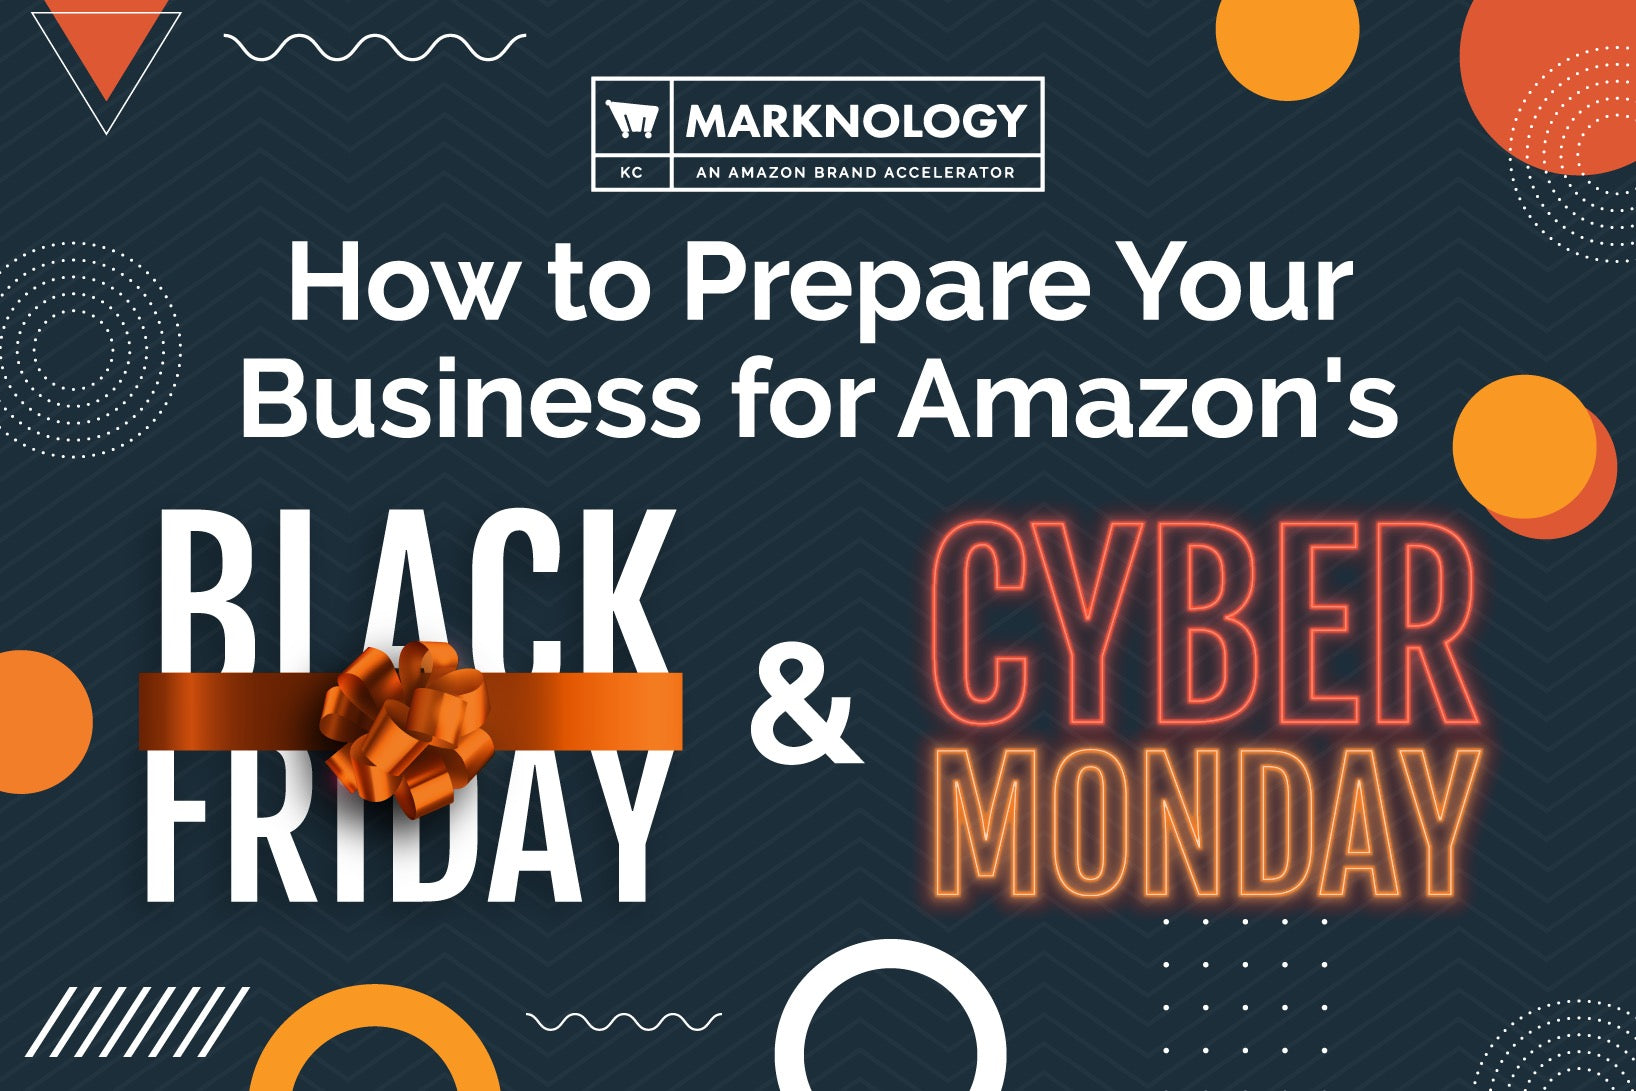 How to Prepare Your Business for Amazon's Black Friday and Cyber Monday